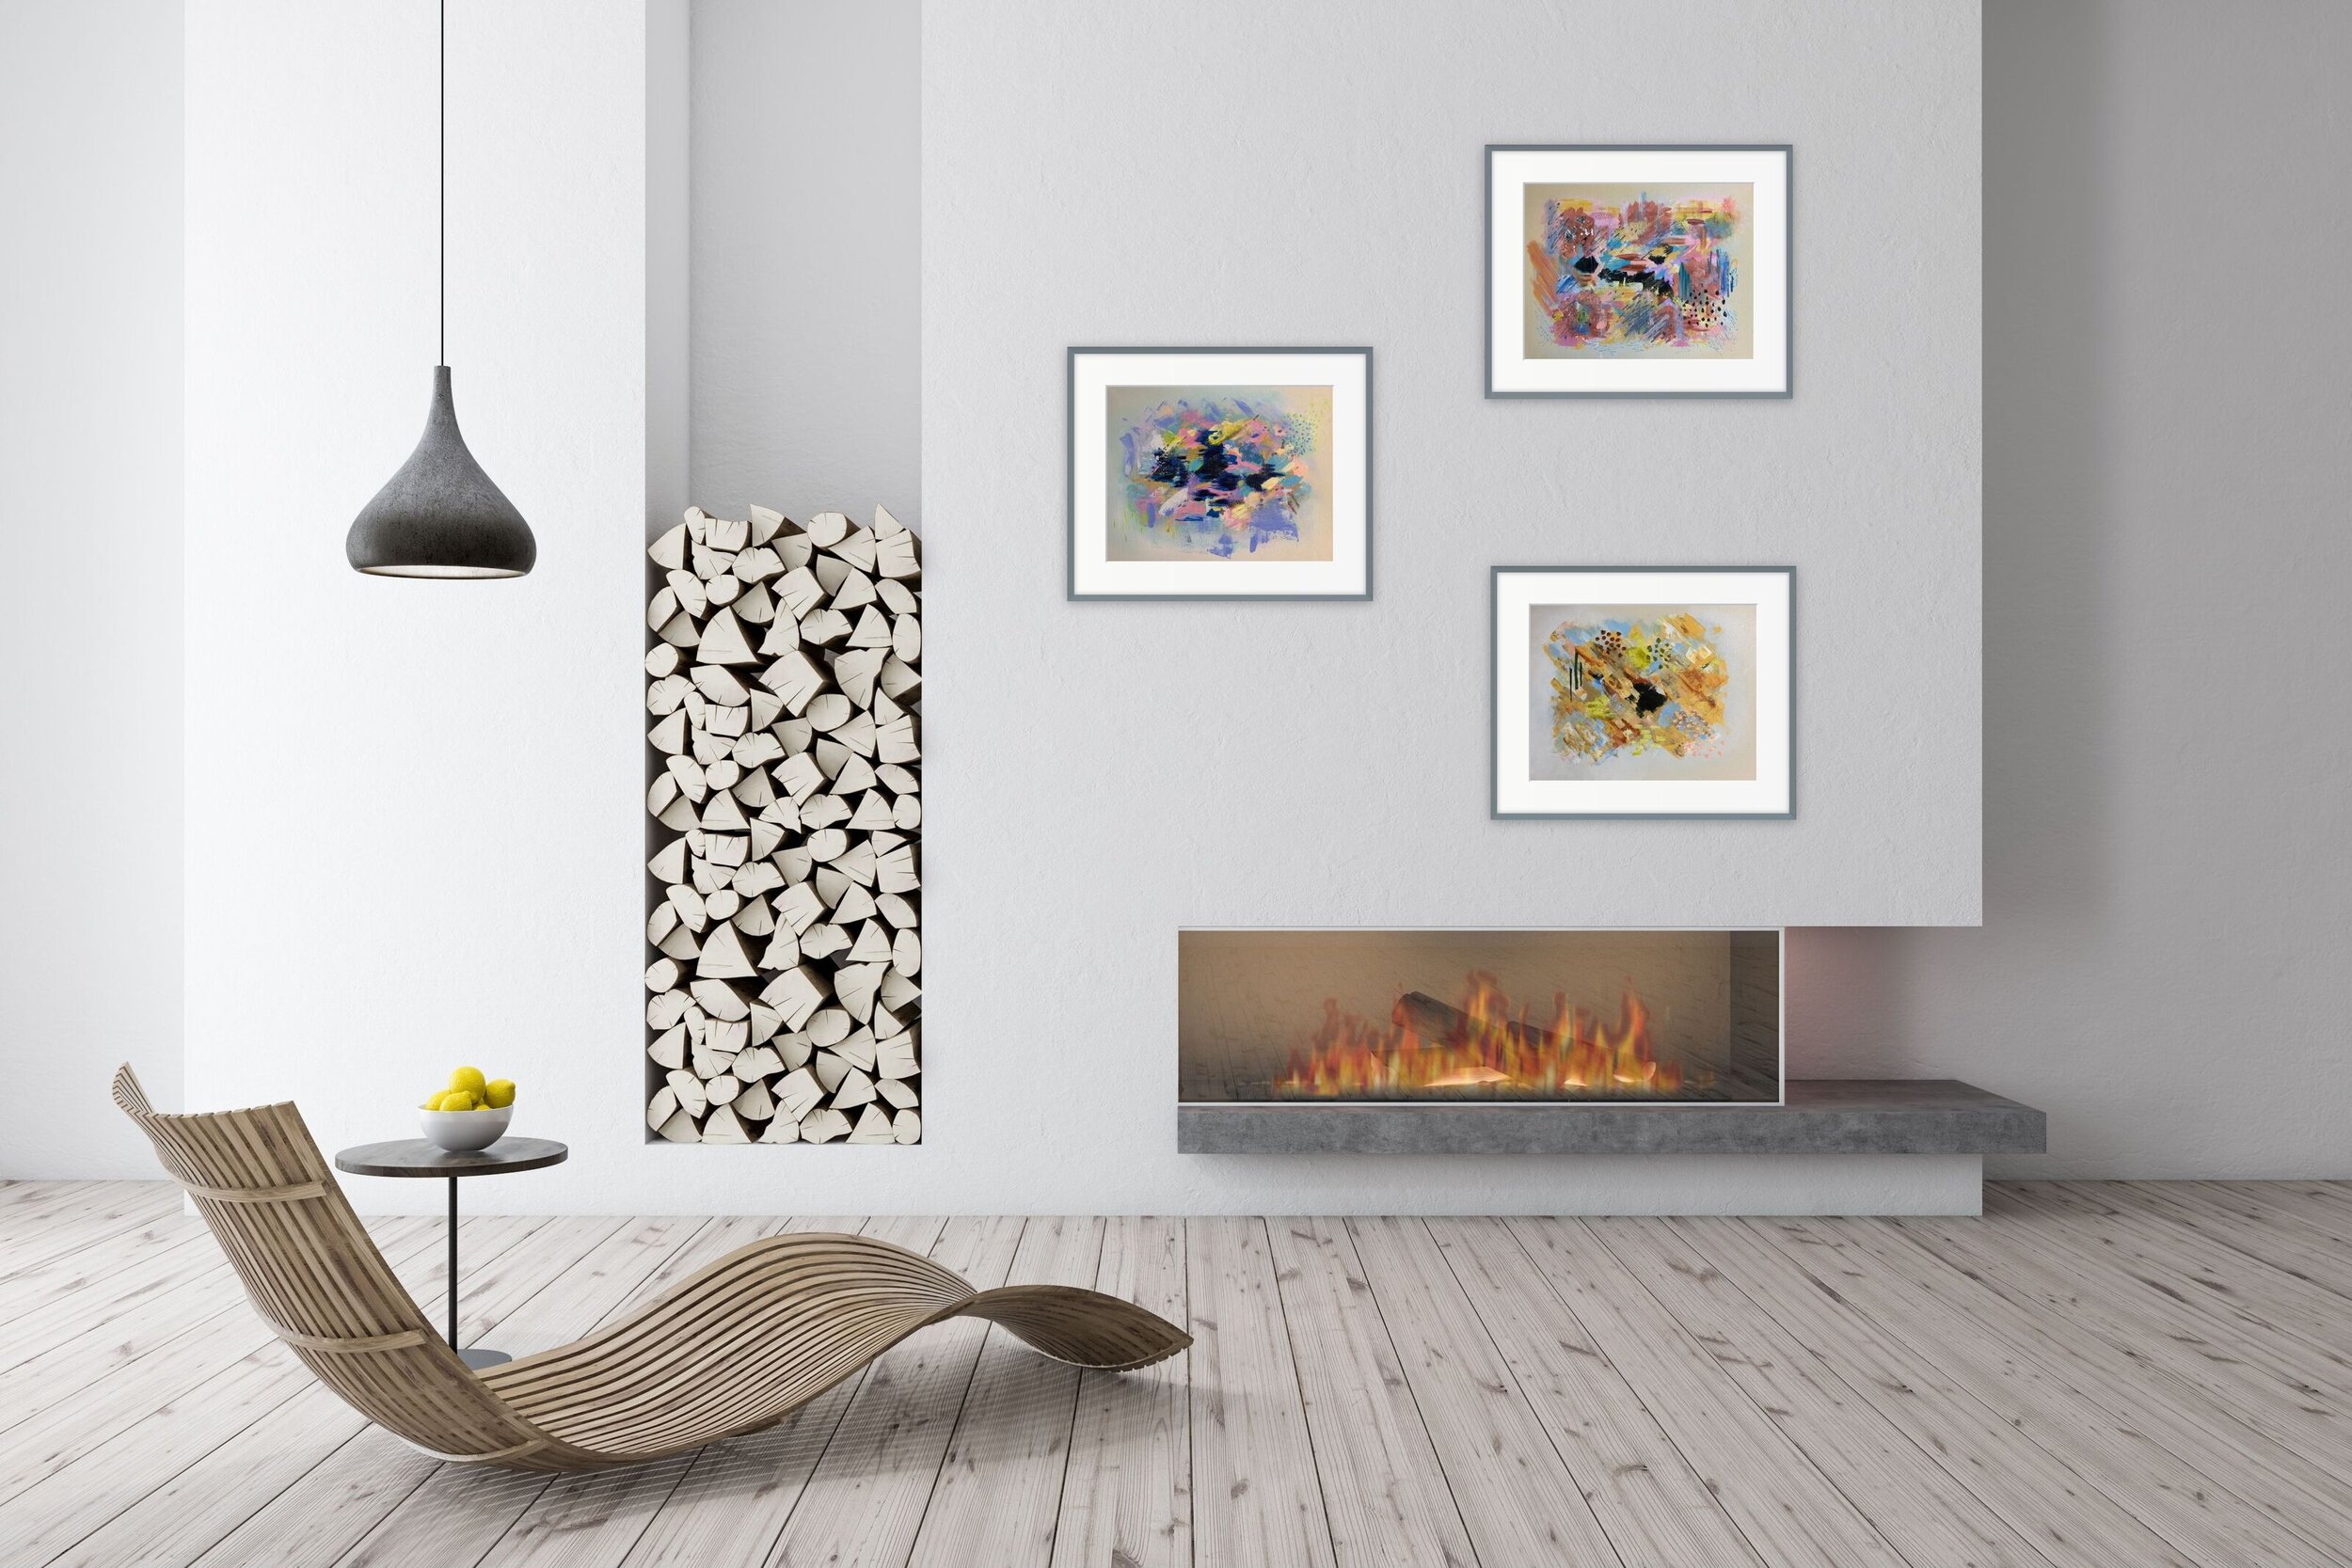 the gestural paintings over fireplace